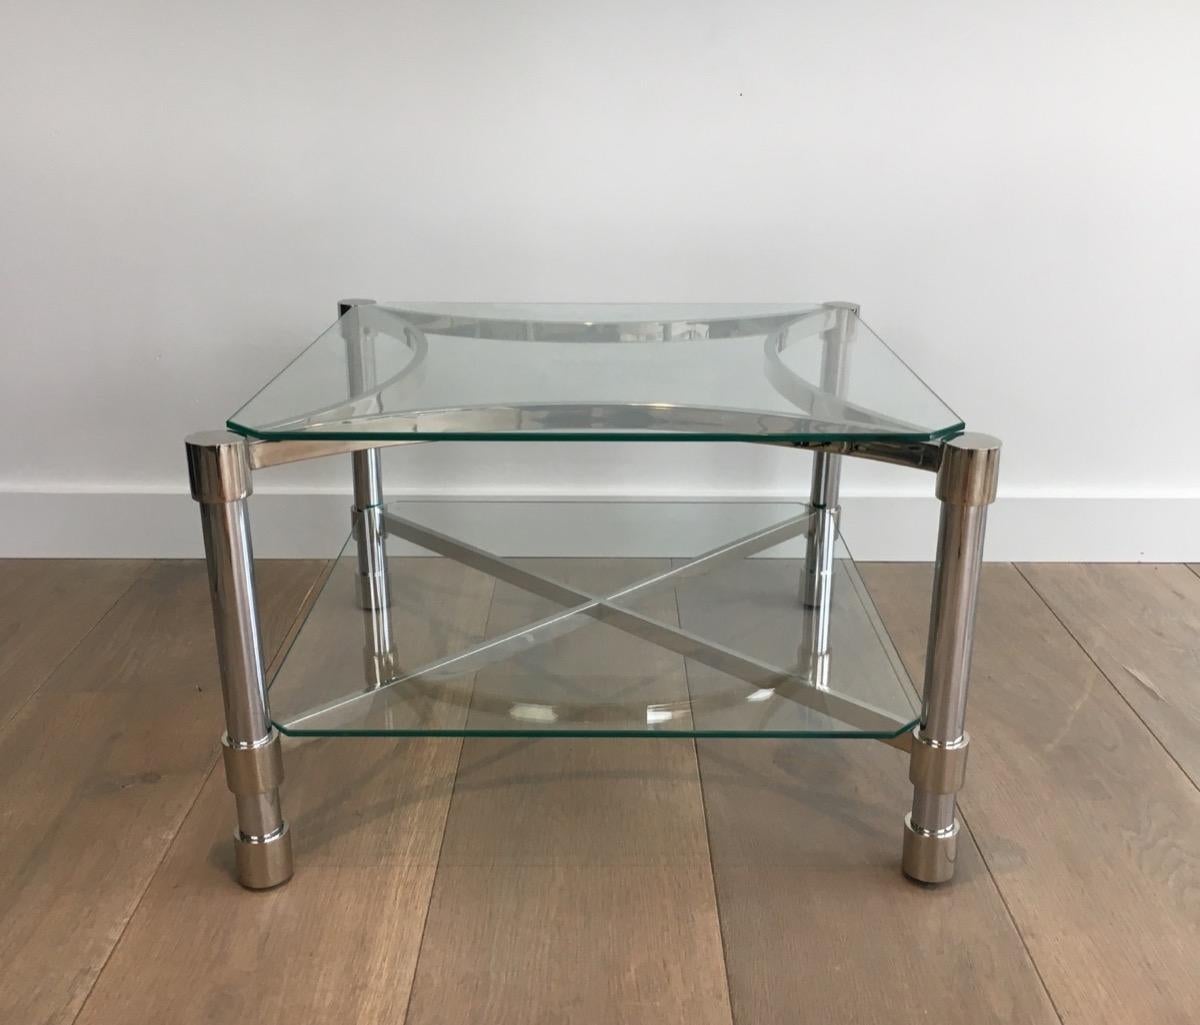 Pair of Unusual Side Tables Made of Chrome and Glass, French, circa 1970 For Sale 10